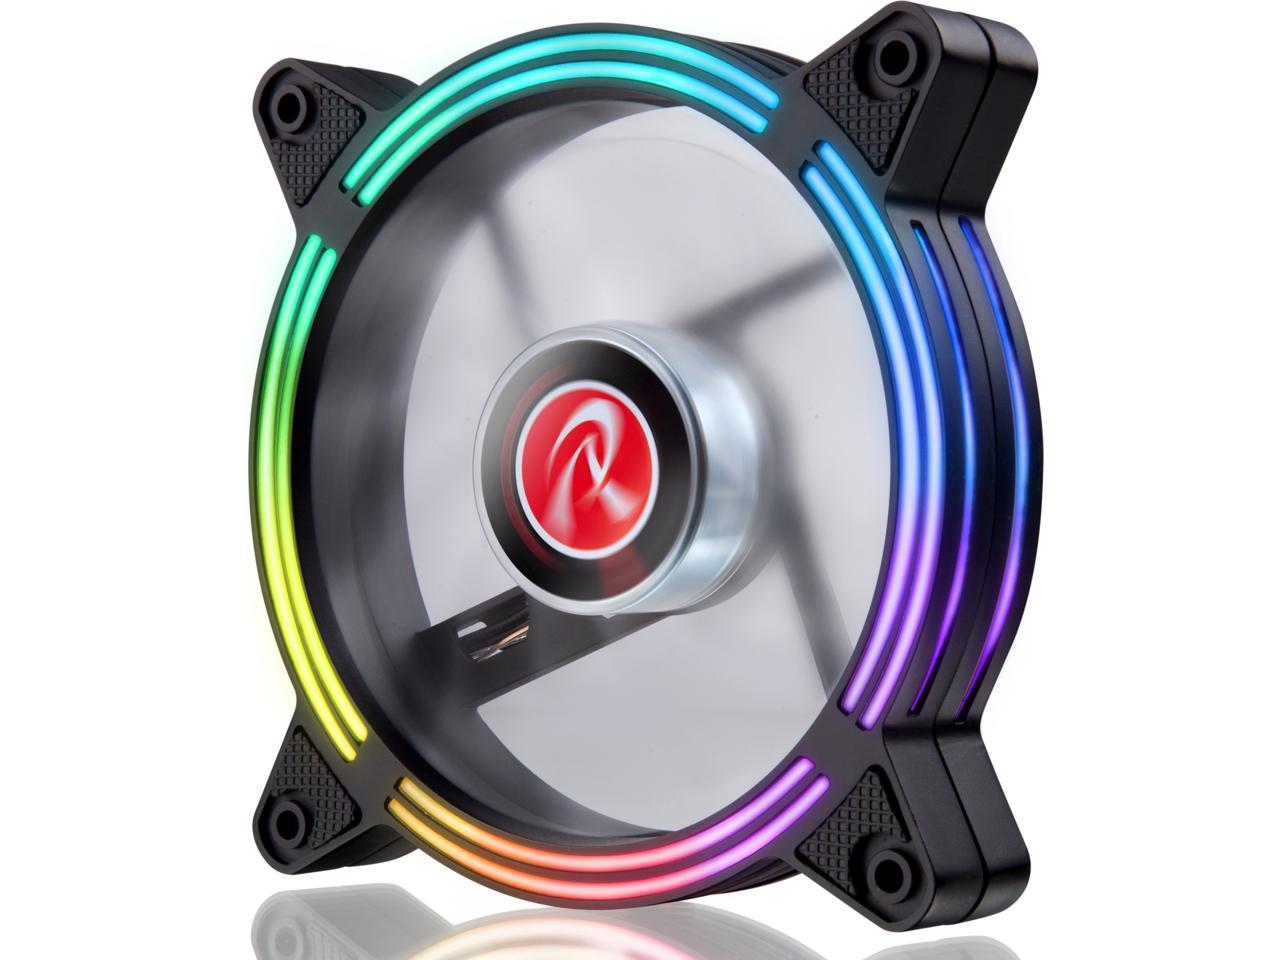 SKLERA 12 RBW ADD -2 pack, Addressable RGB, 12025 PWM fan, with 8 port Addressable LED hub, Remote controller & Connecting M/B cable, compatible with ASUS/MSI 5V ADD header, brings visible color